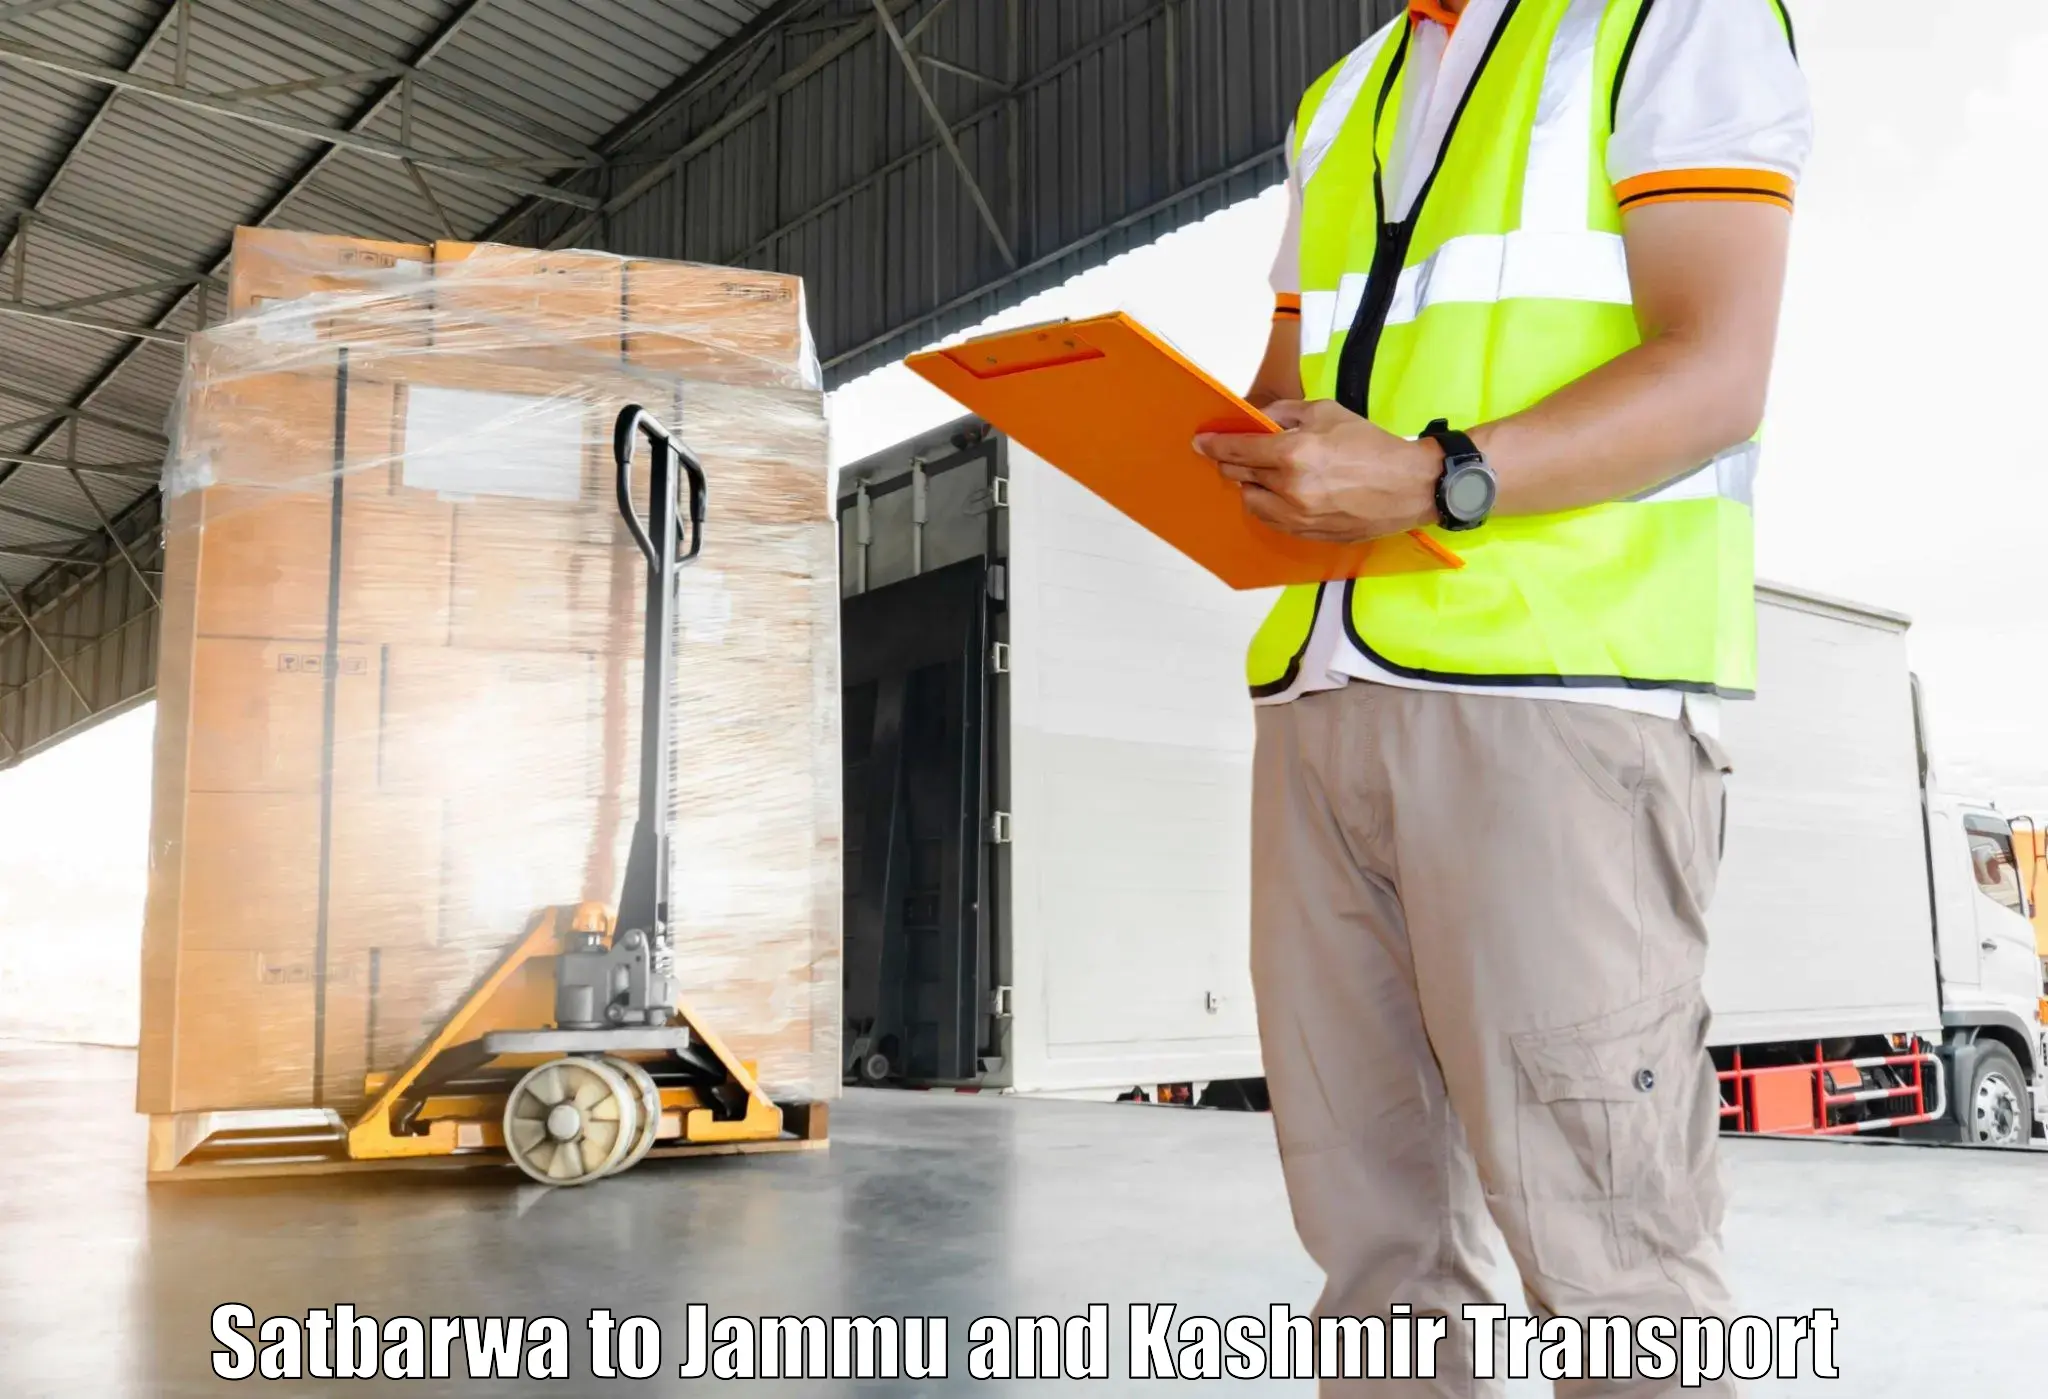 Container transport service Satbarwa to Bandipur